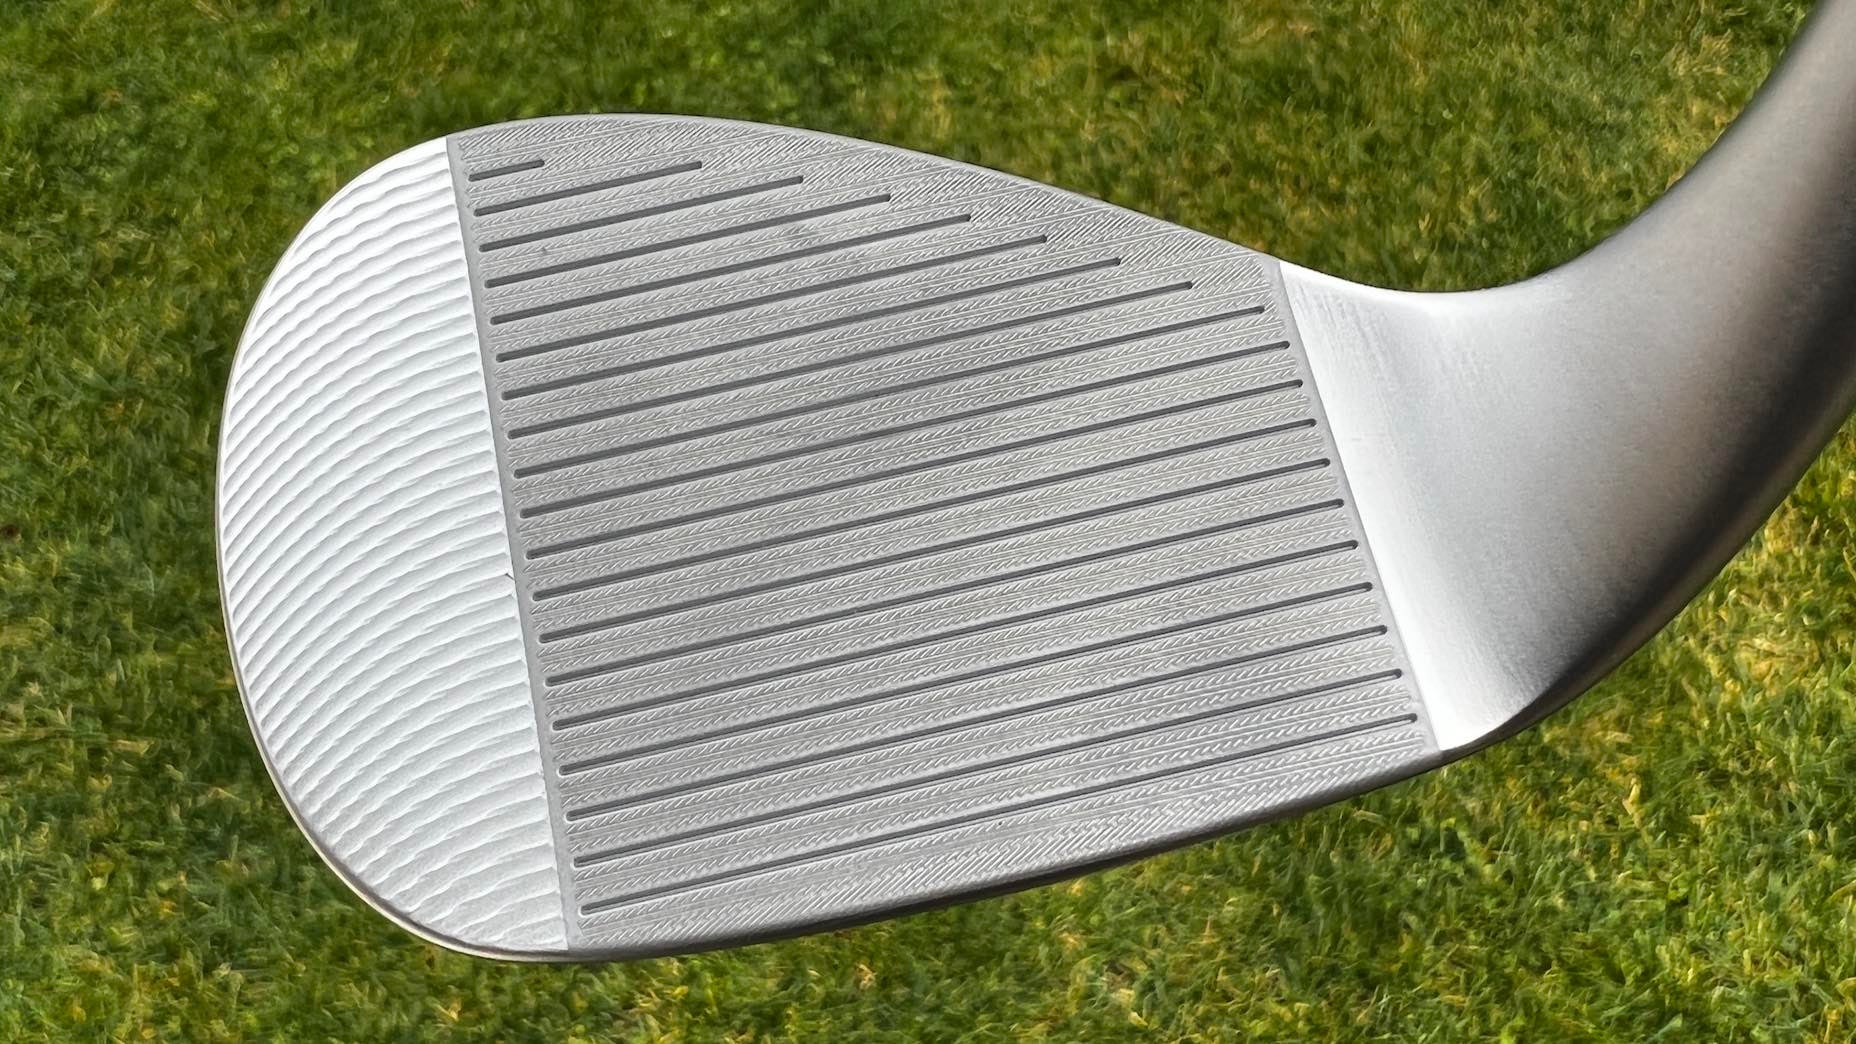 CLeveland RTX6 wedges 2023 face